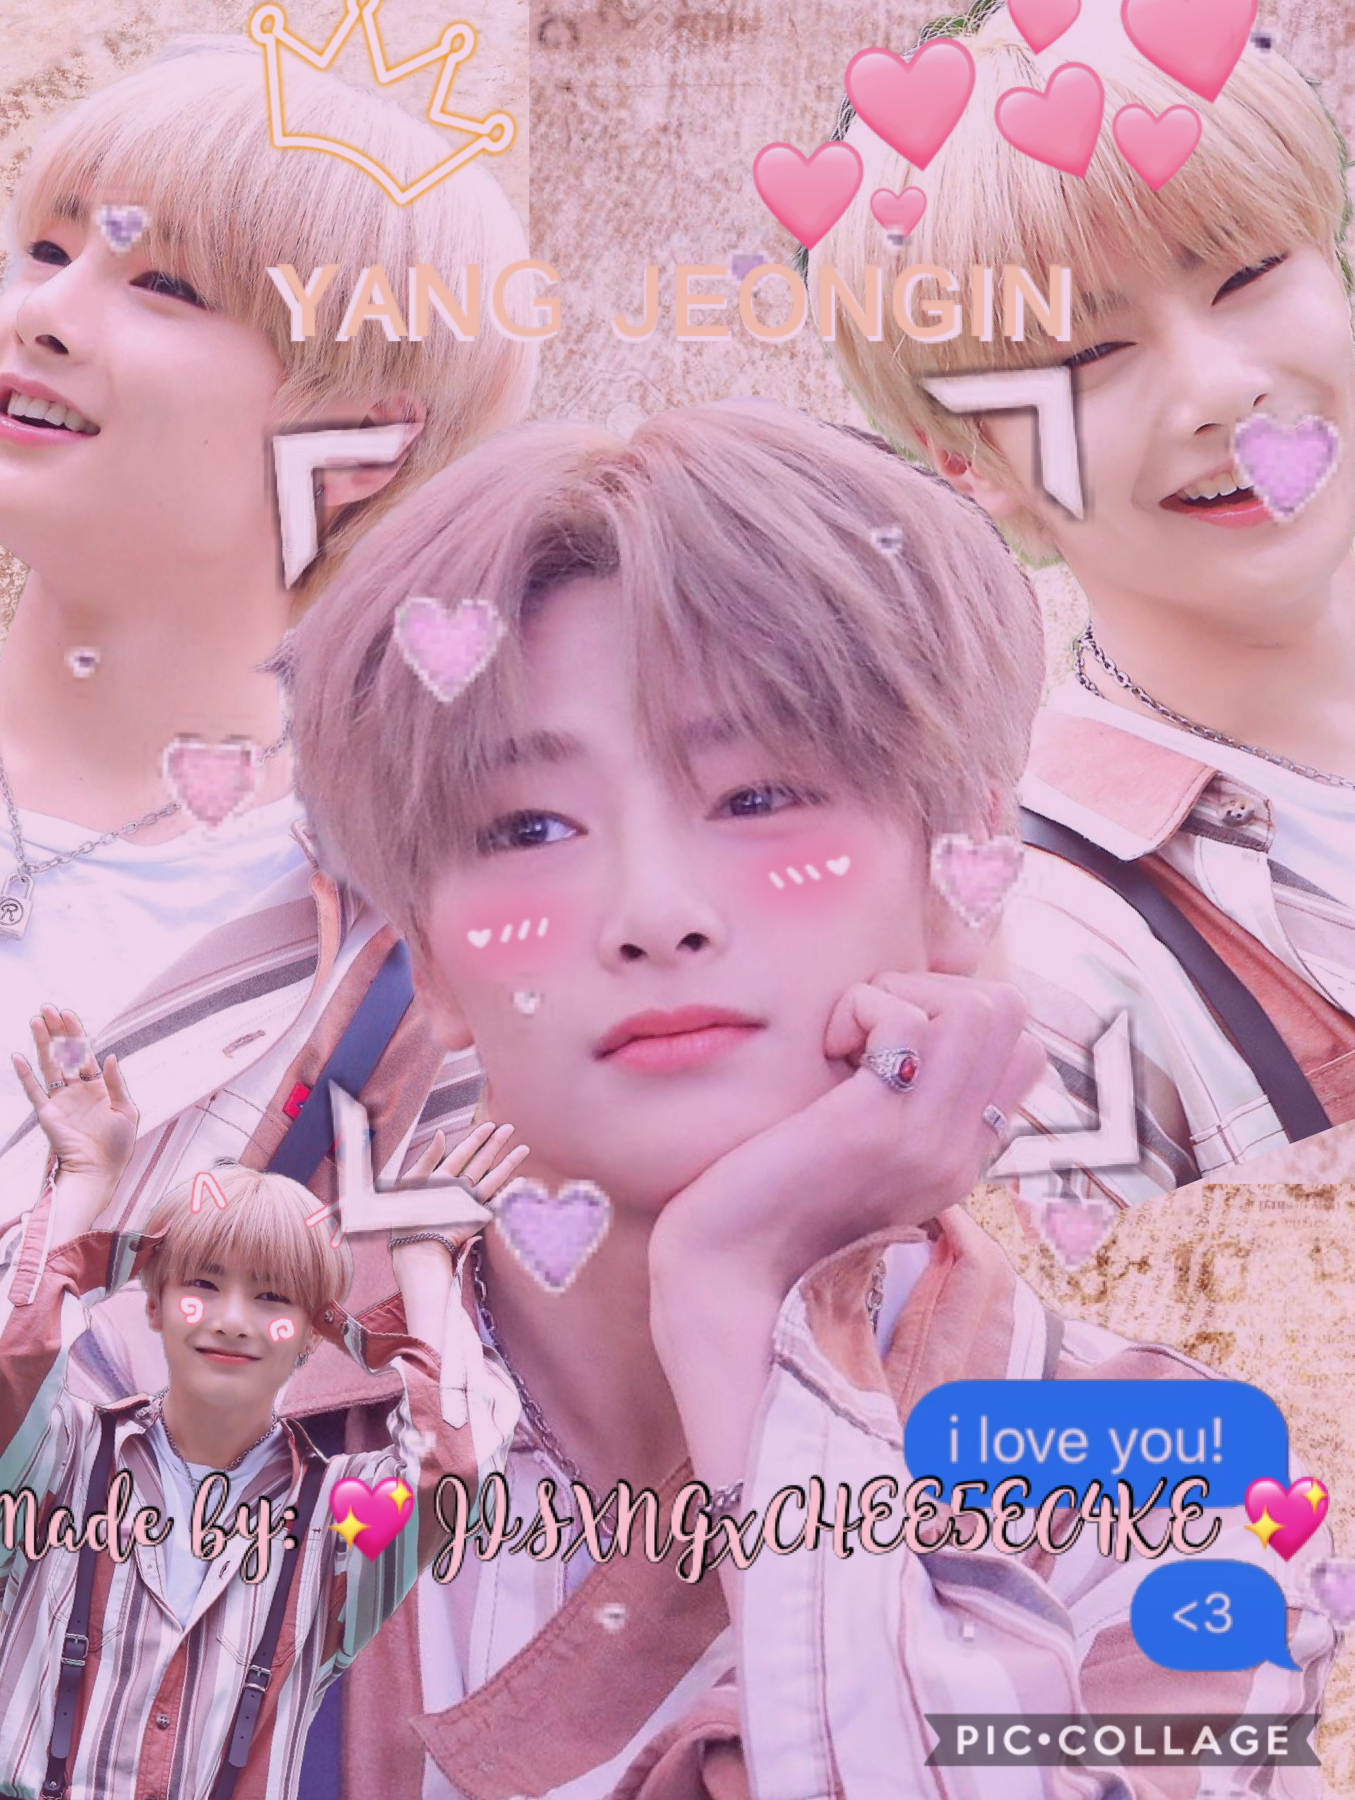 Onion! Just a little edit of Yang Jeongin! My beloved bias wrecker and sometimes bias! I can’t stay loyal to jisung all the time but currently I’m loyal :)